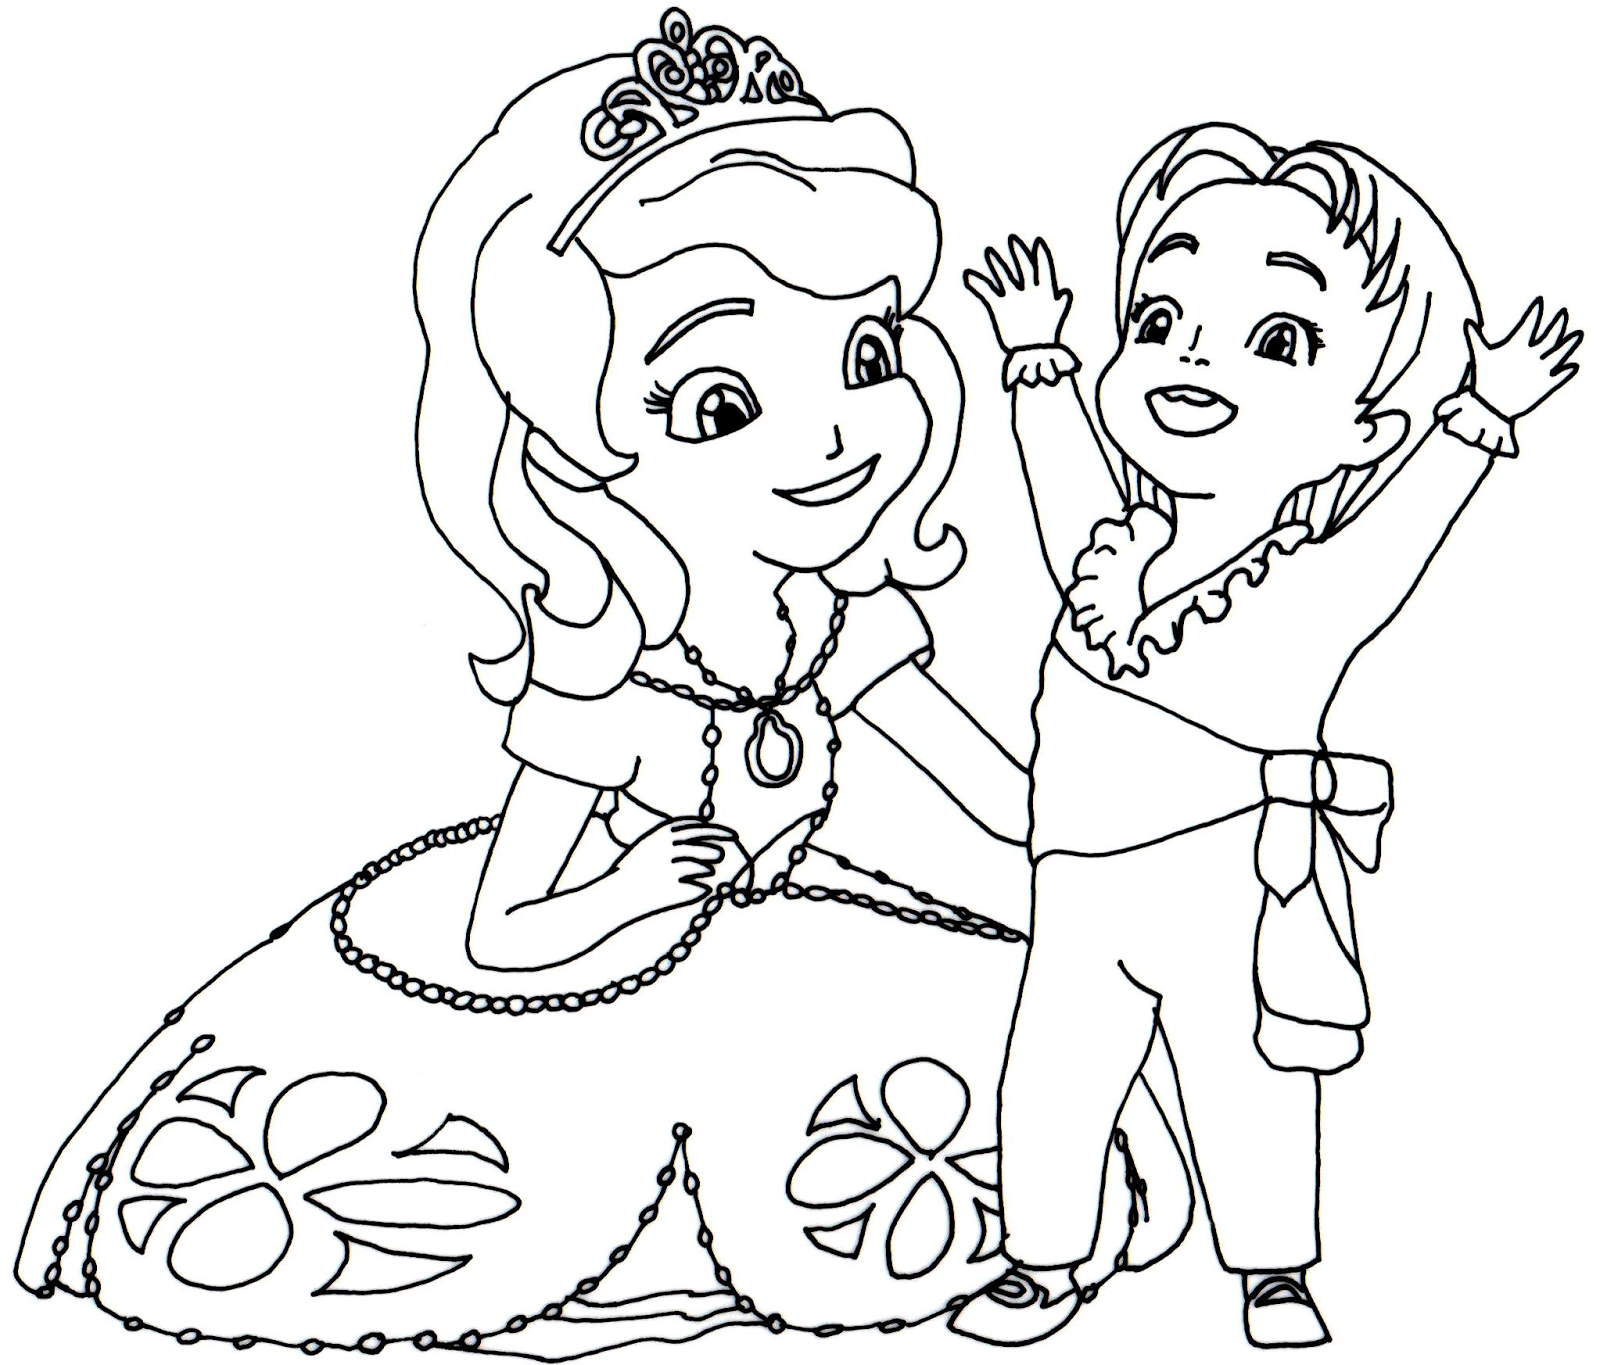 Sofia the First Coloring Pages   Best Coloring Pages For Kids